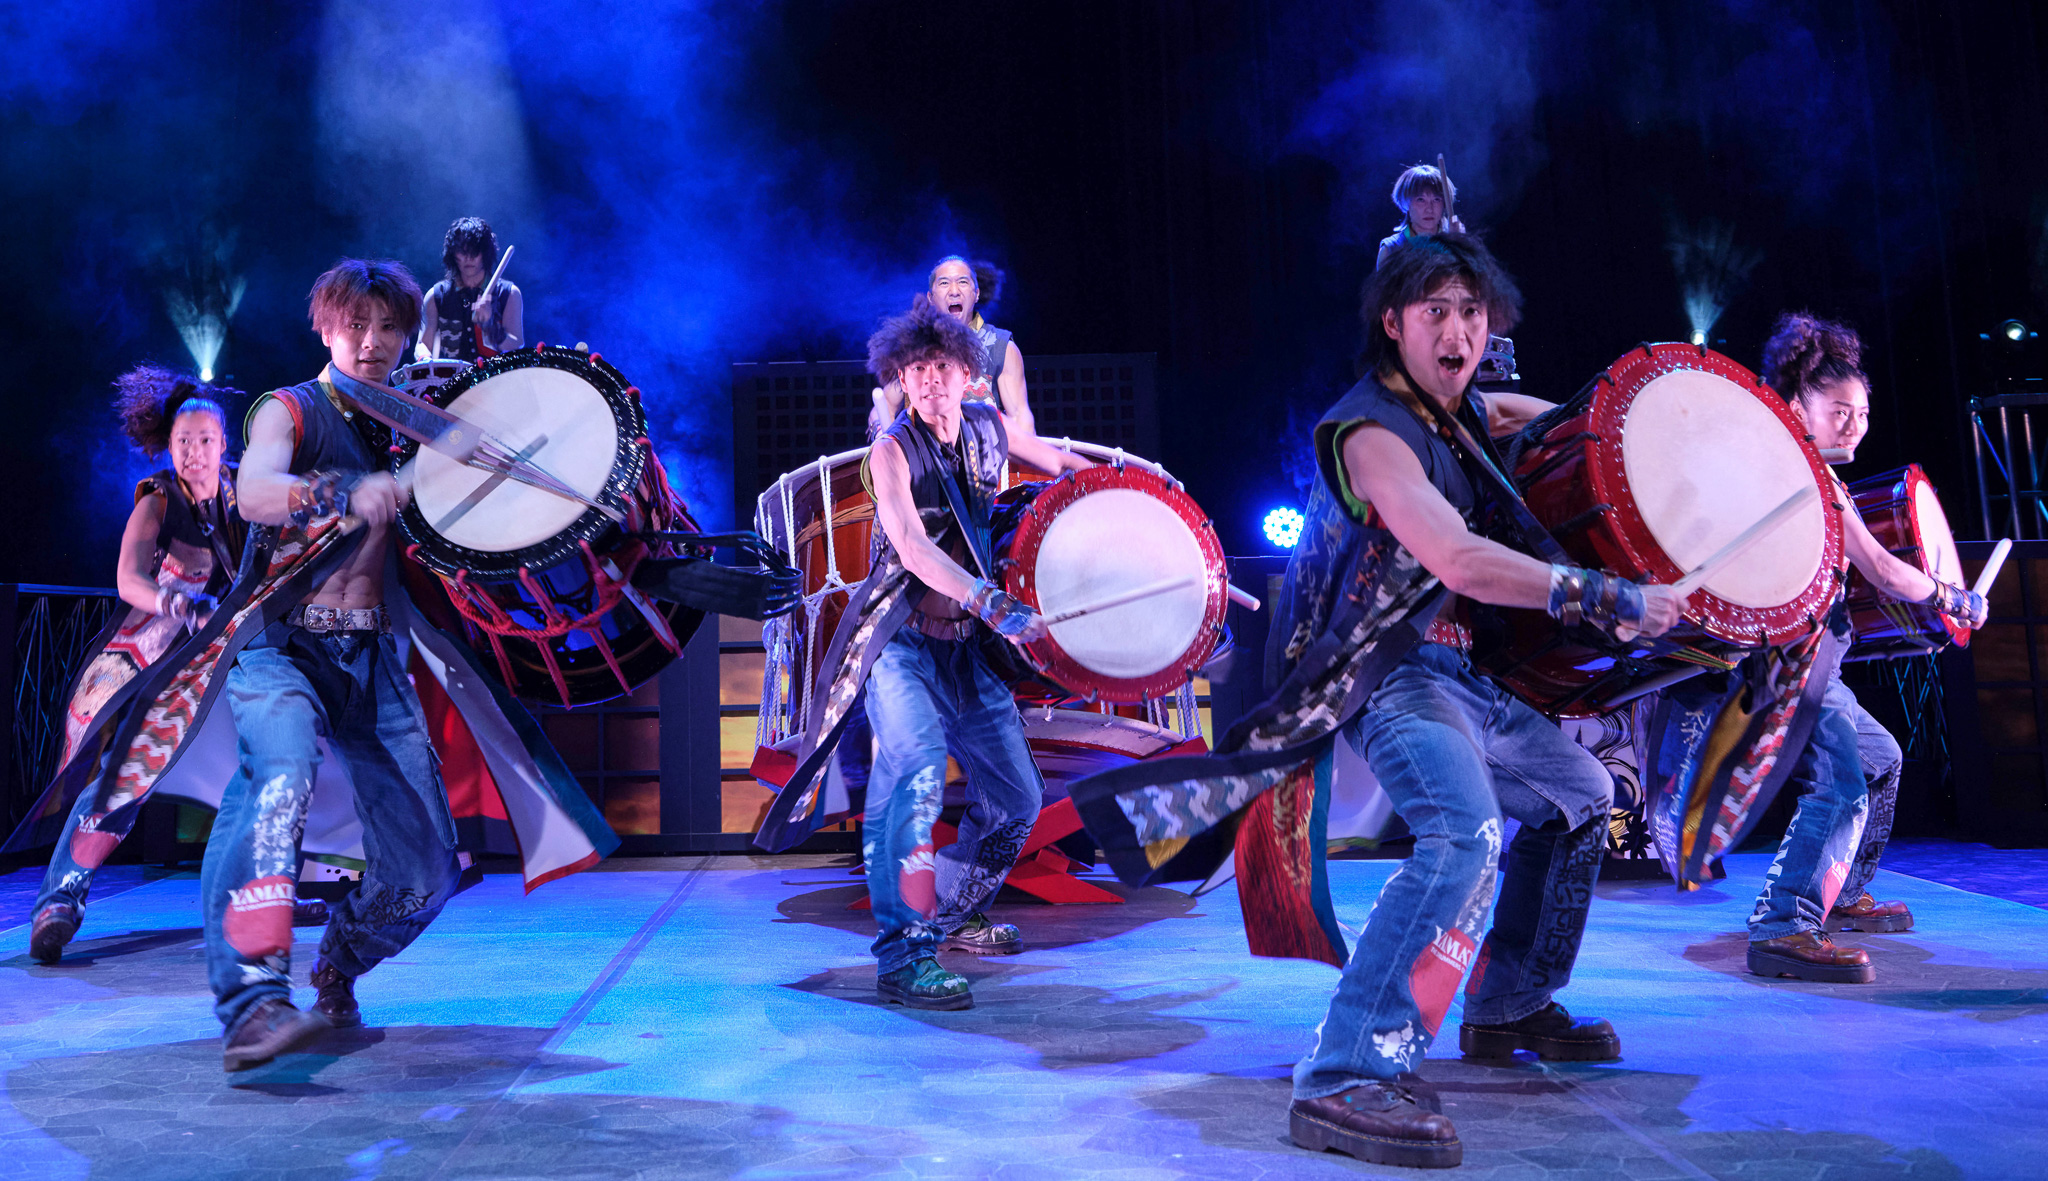 YAMATO drummers on stage with their drums